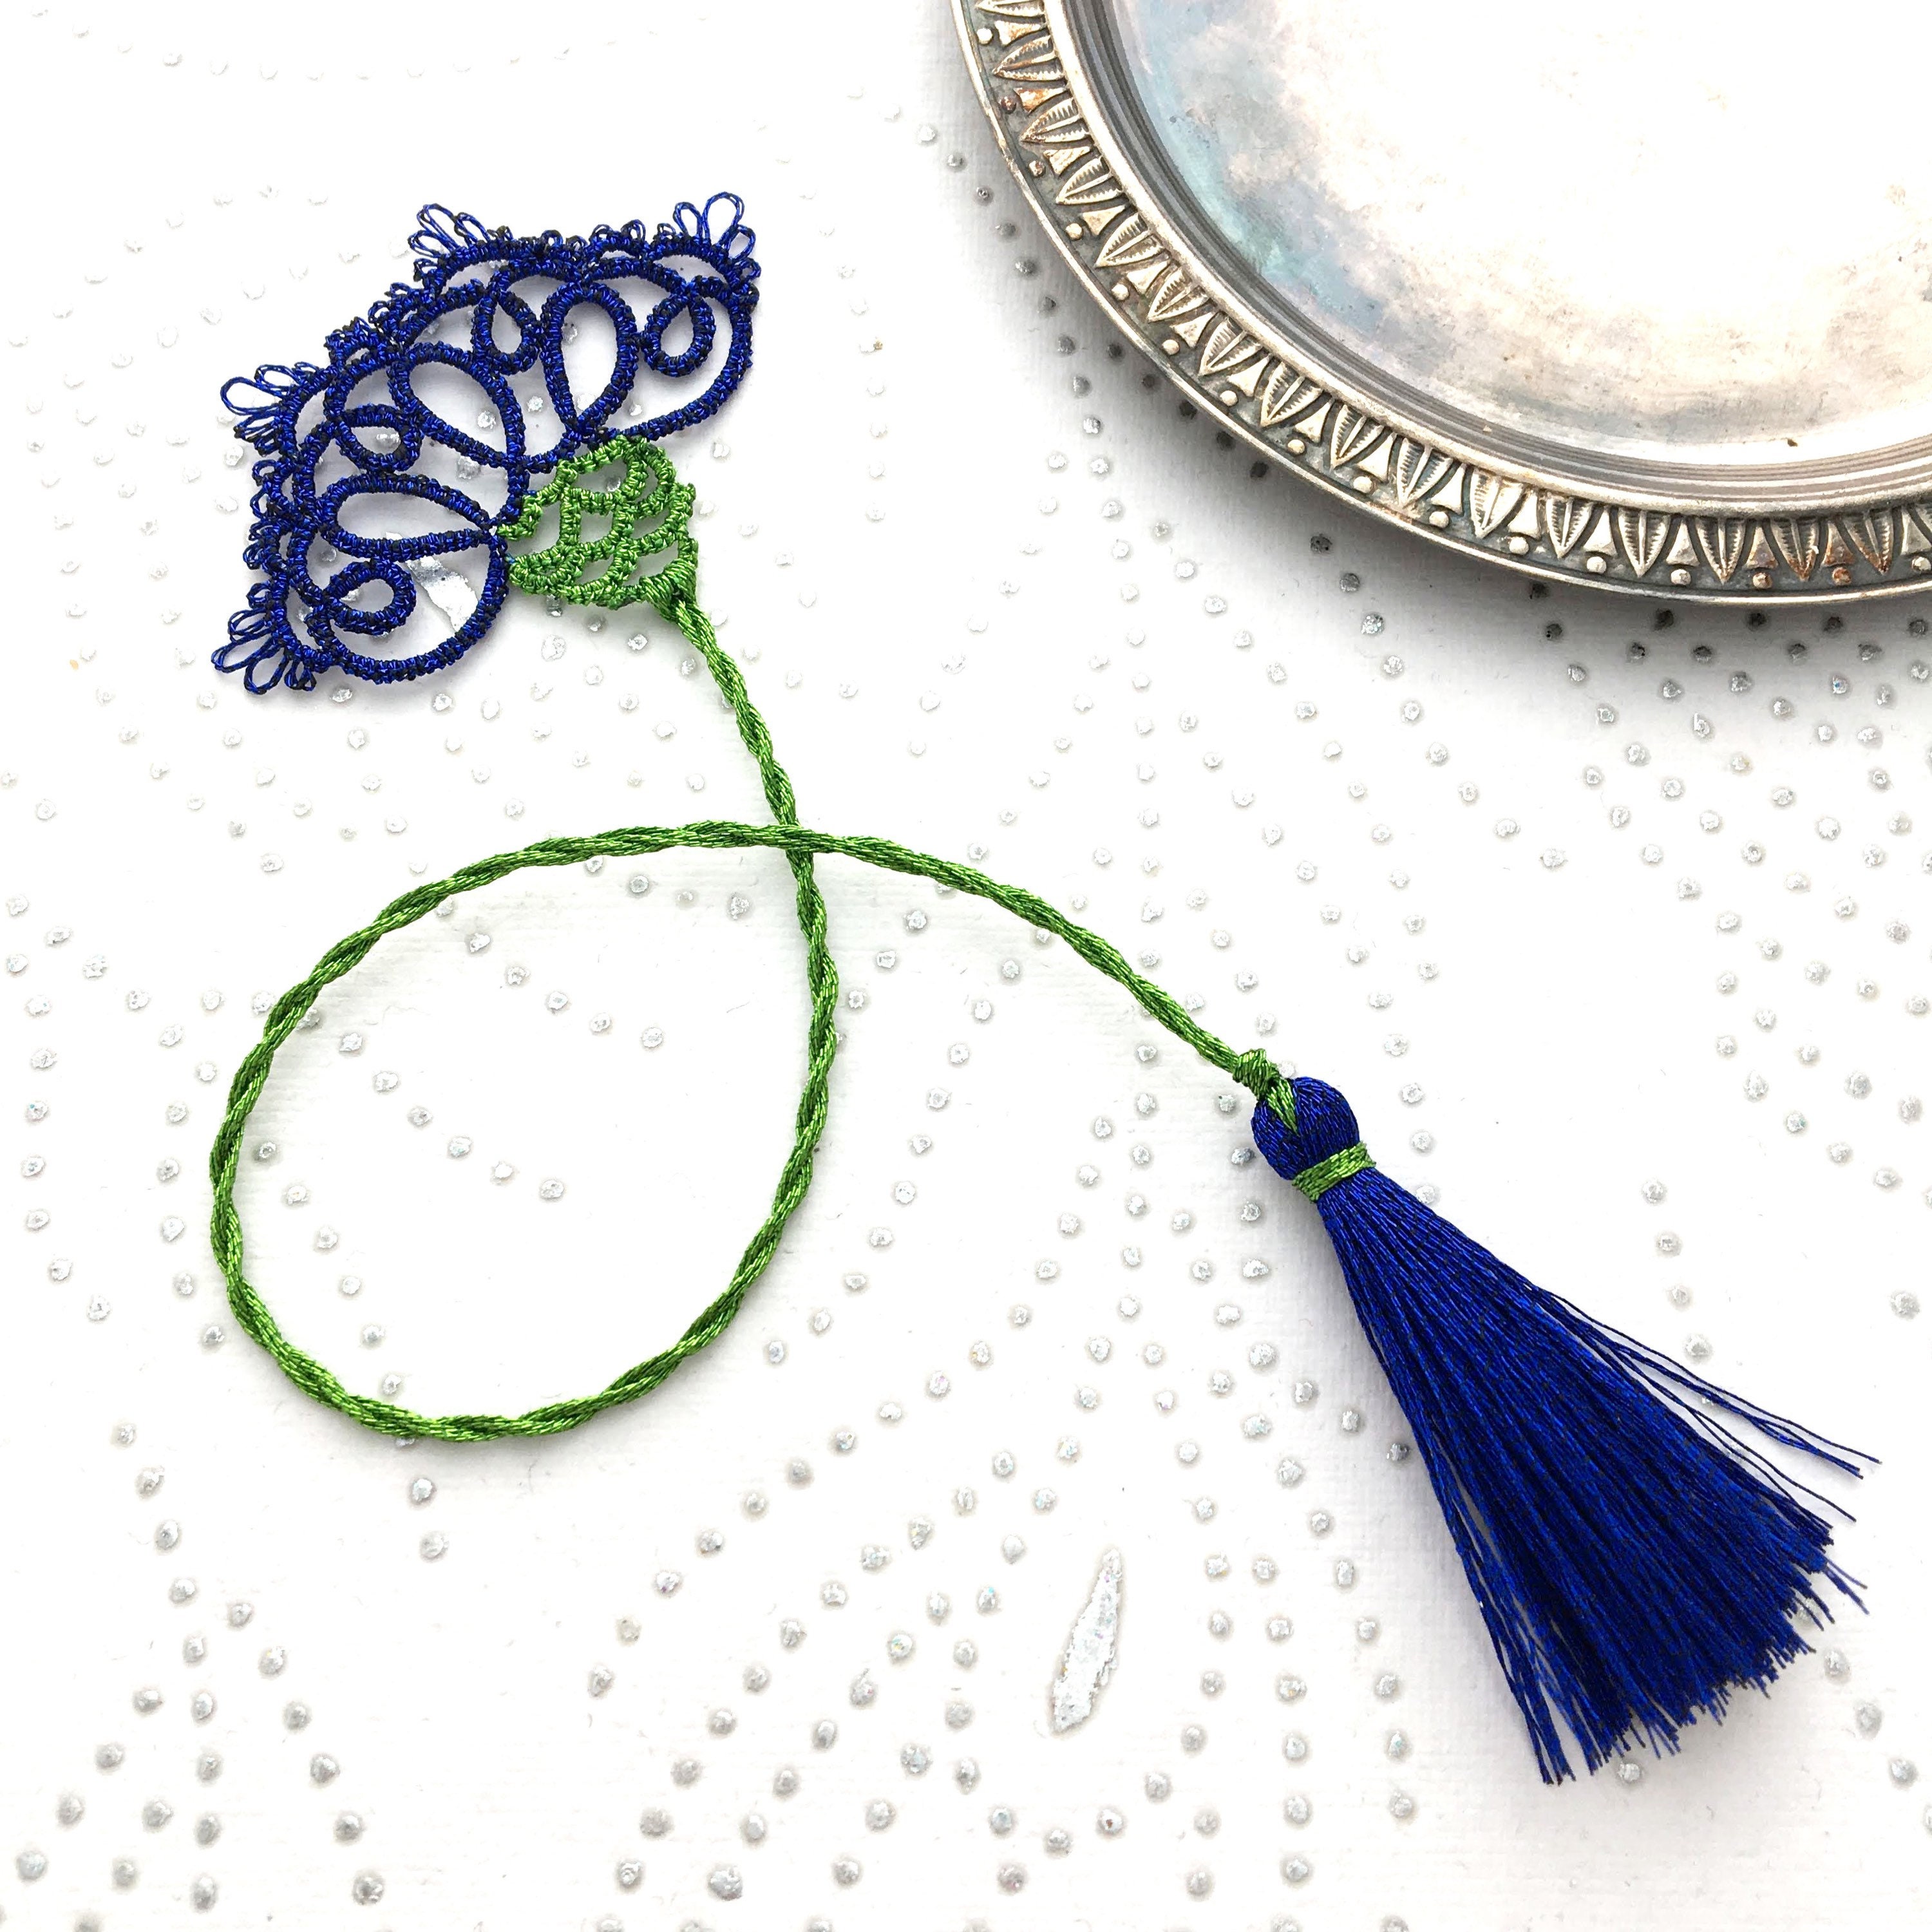 Bookmark Cornflower Tatting Shuttle Tutorial, Tatting Pattern and Step by  Step Instructions for Flower Motif 